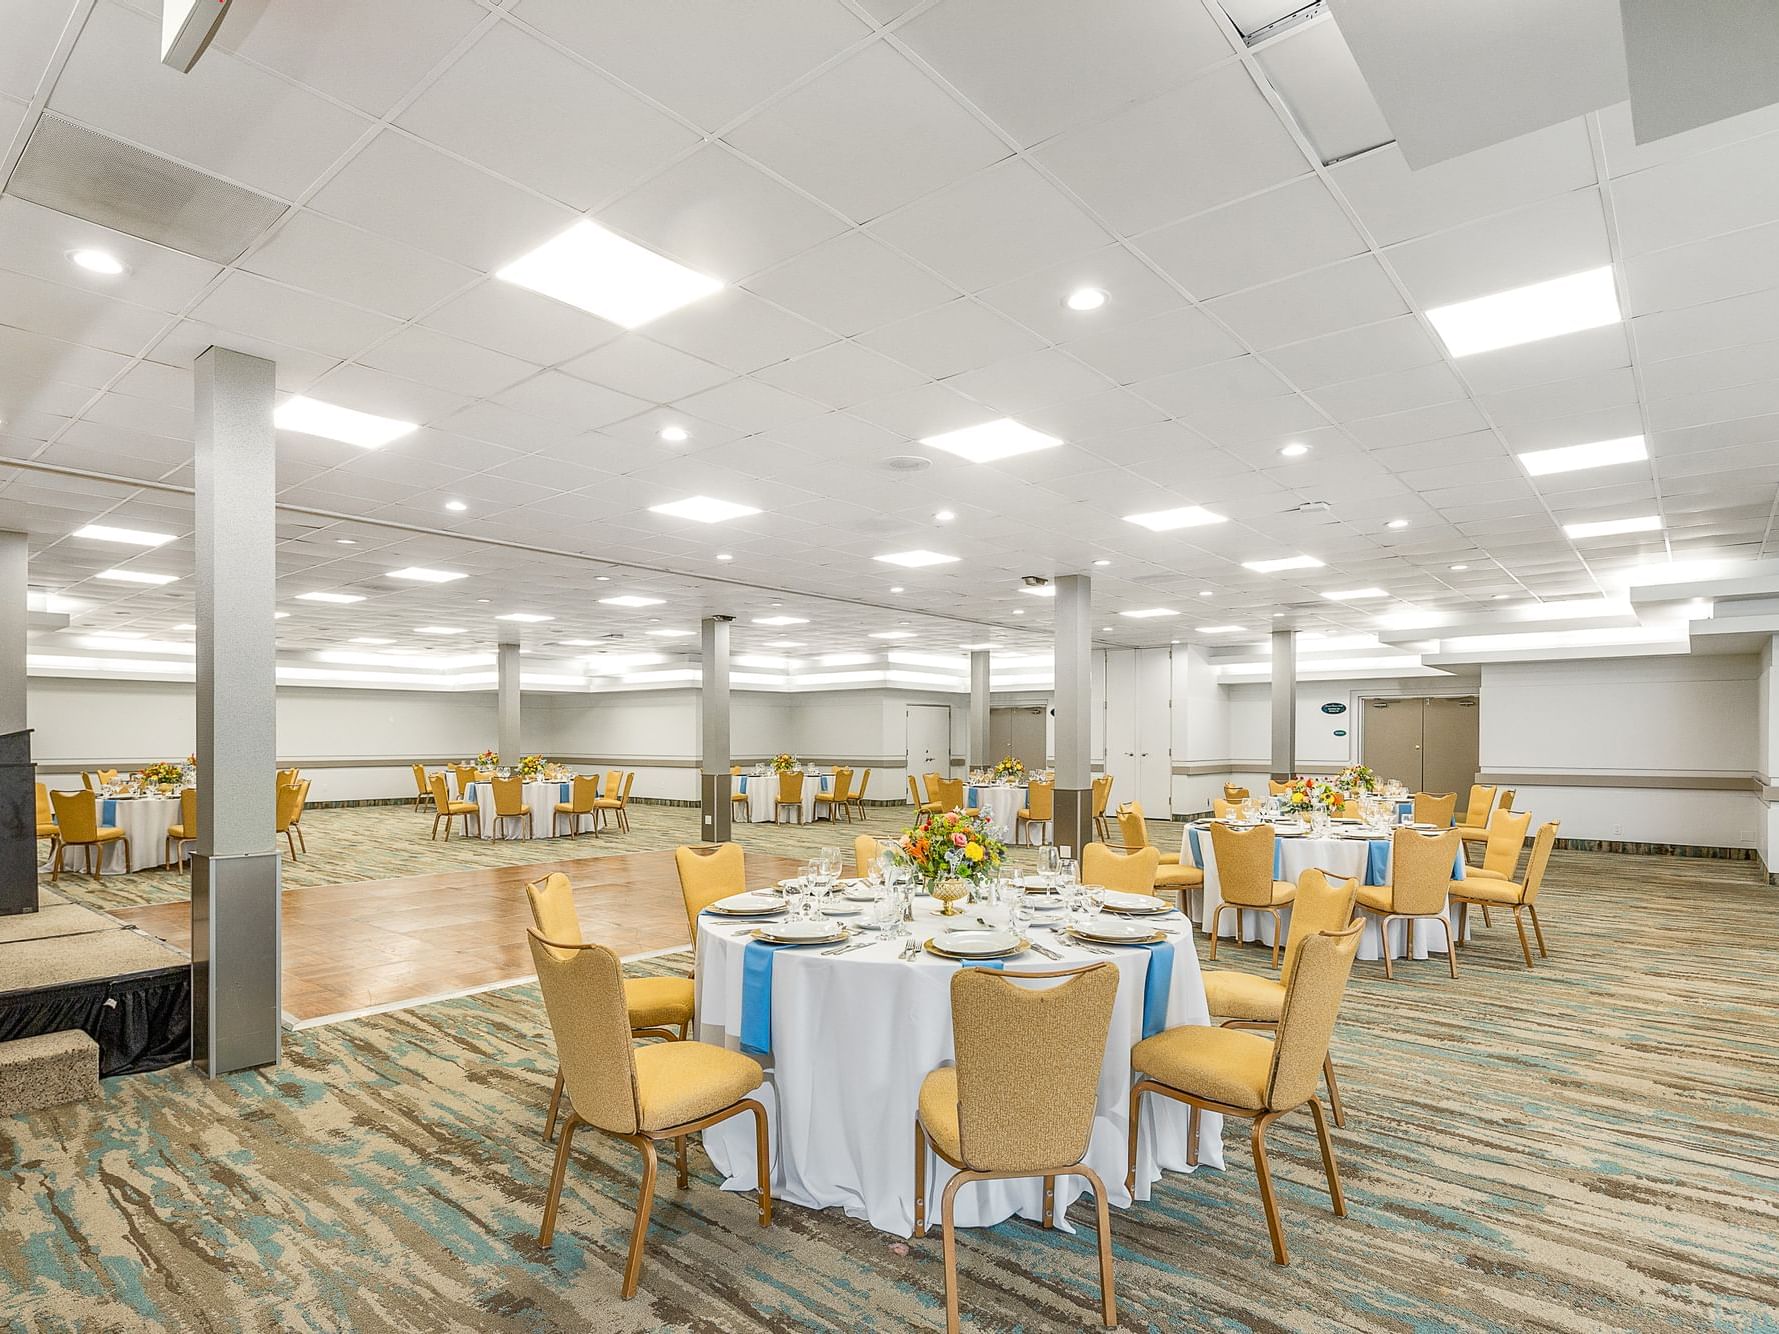 Arranged The Riviera Room at The Anaheim Hotel